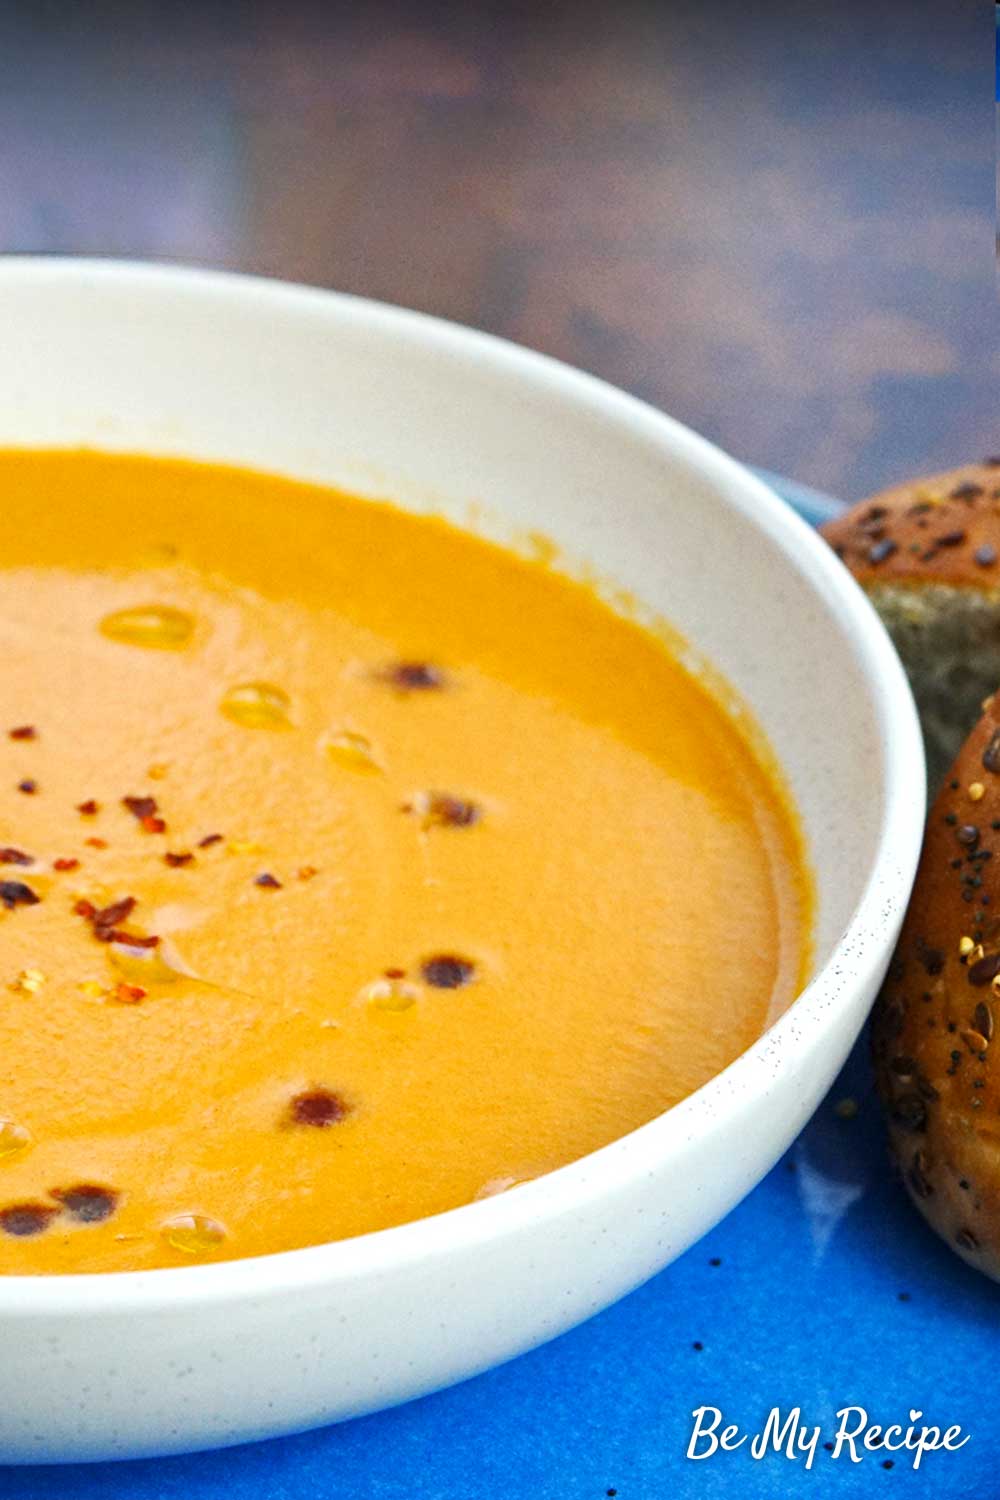 Roasted Tomato Soup Recipe That’s Rich, Sweet, and Silky Soft